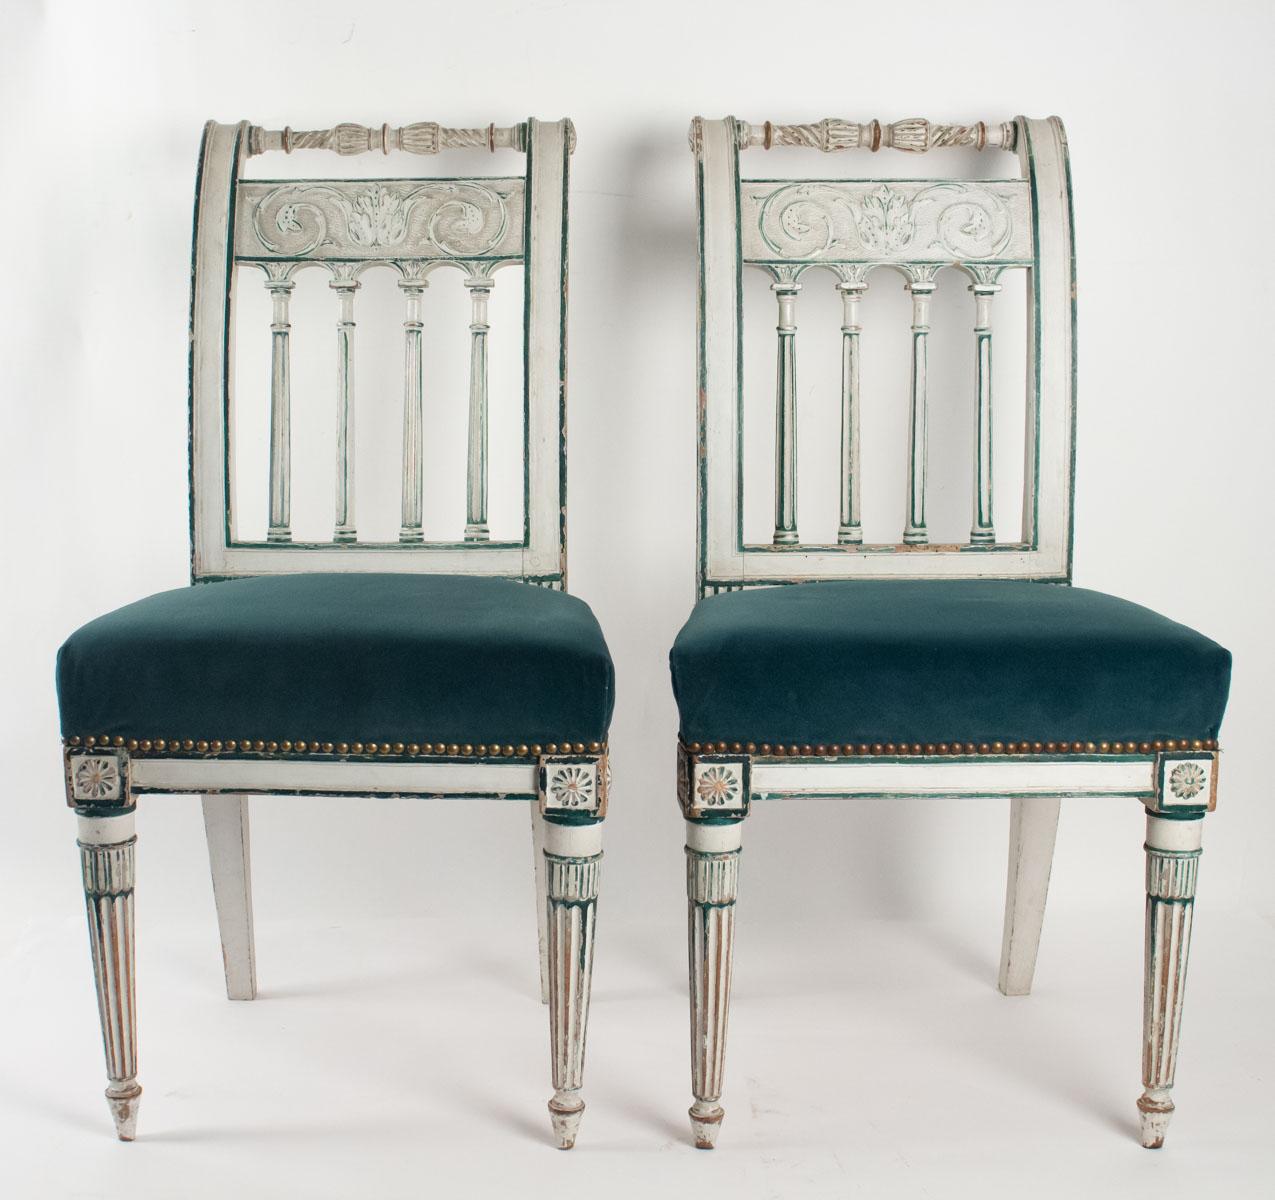 Series of 6 Chairs Directoire Period, 19th Century 3